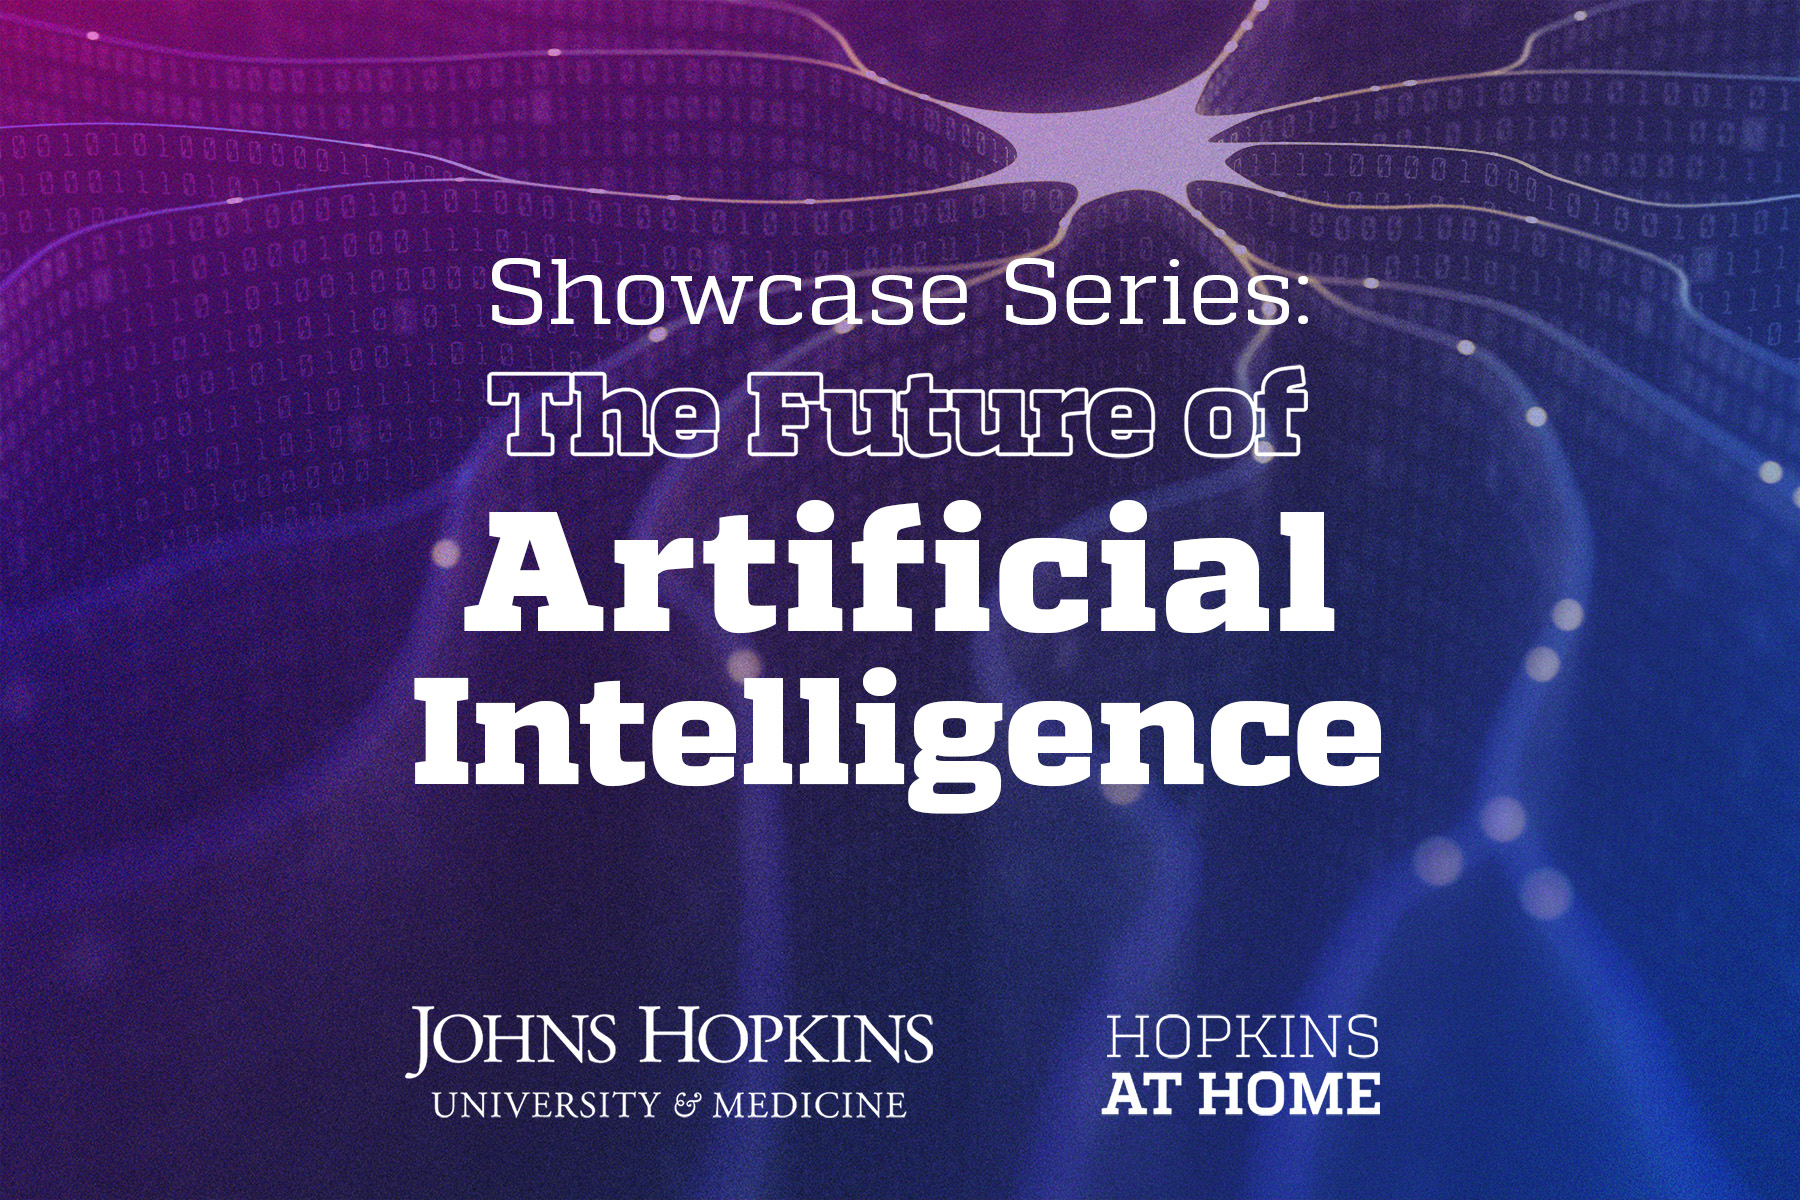 Hopkins at Home - The Future of Artificial Intelligence